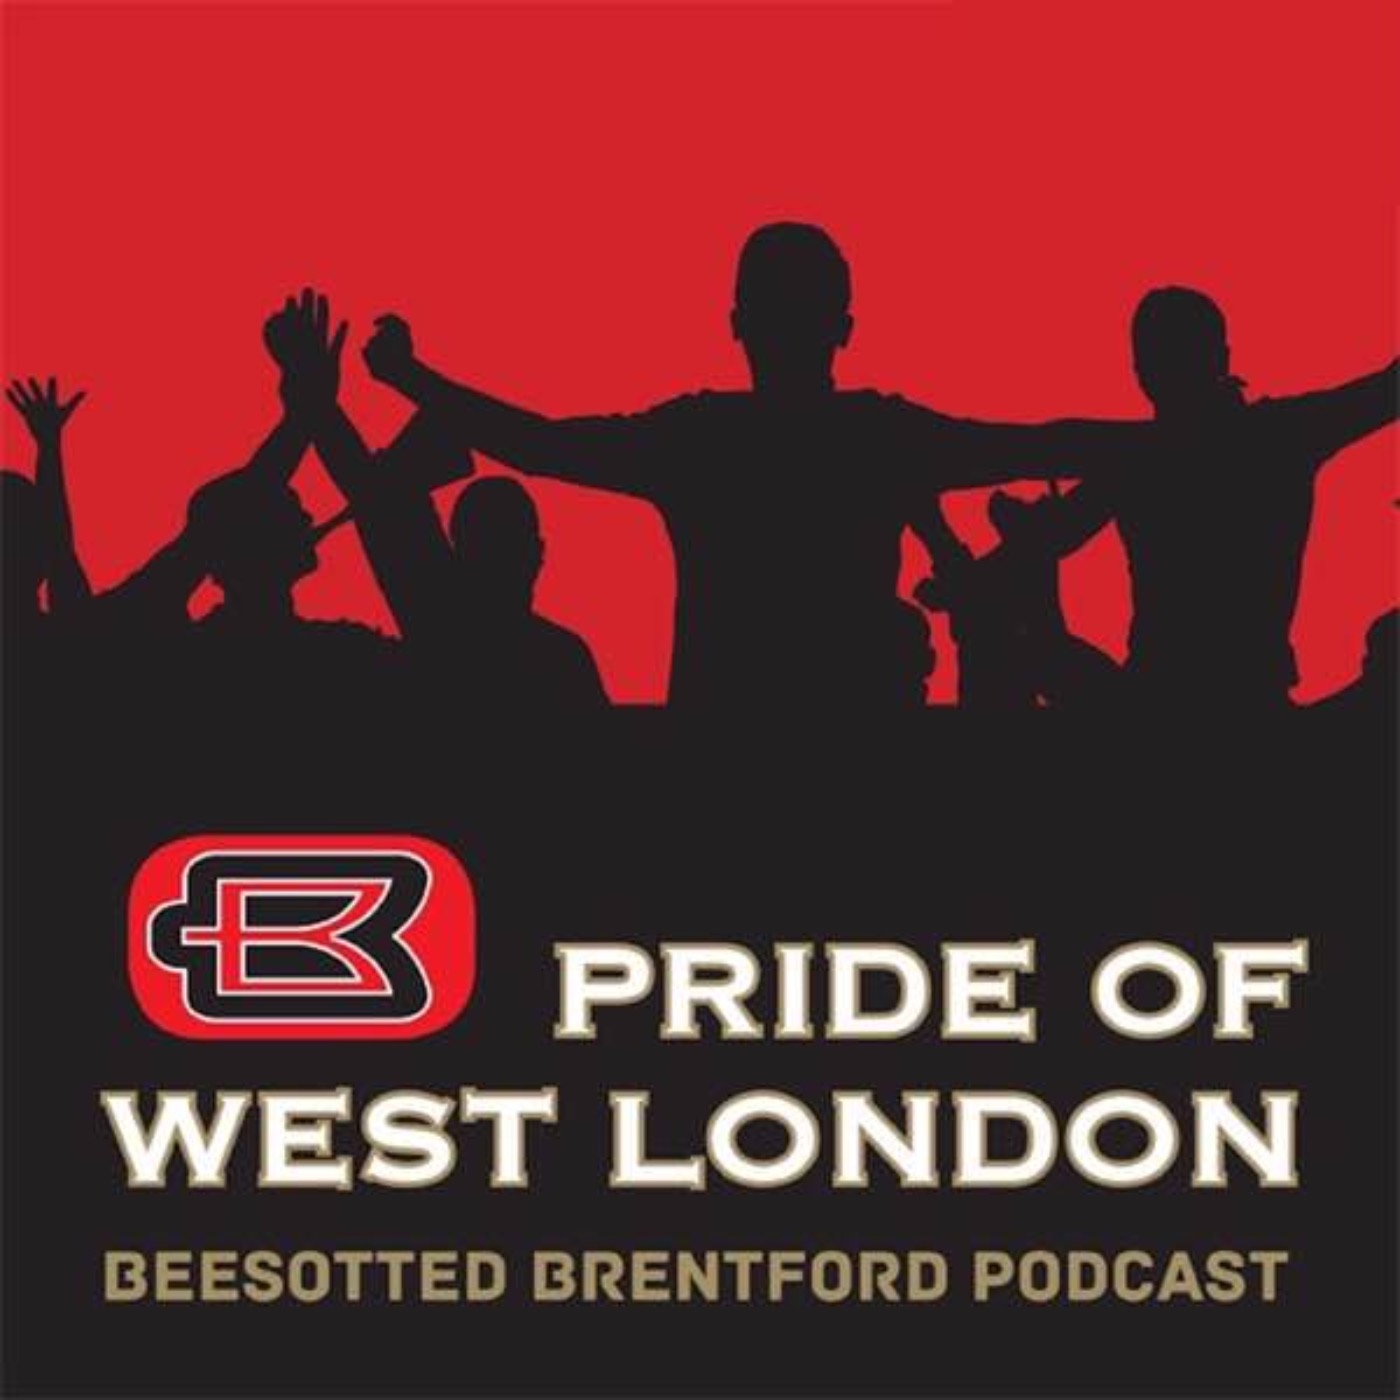 Wrong Podcast Link - Arsenal Post Match Podcast